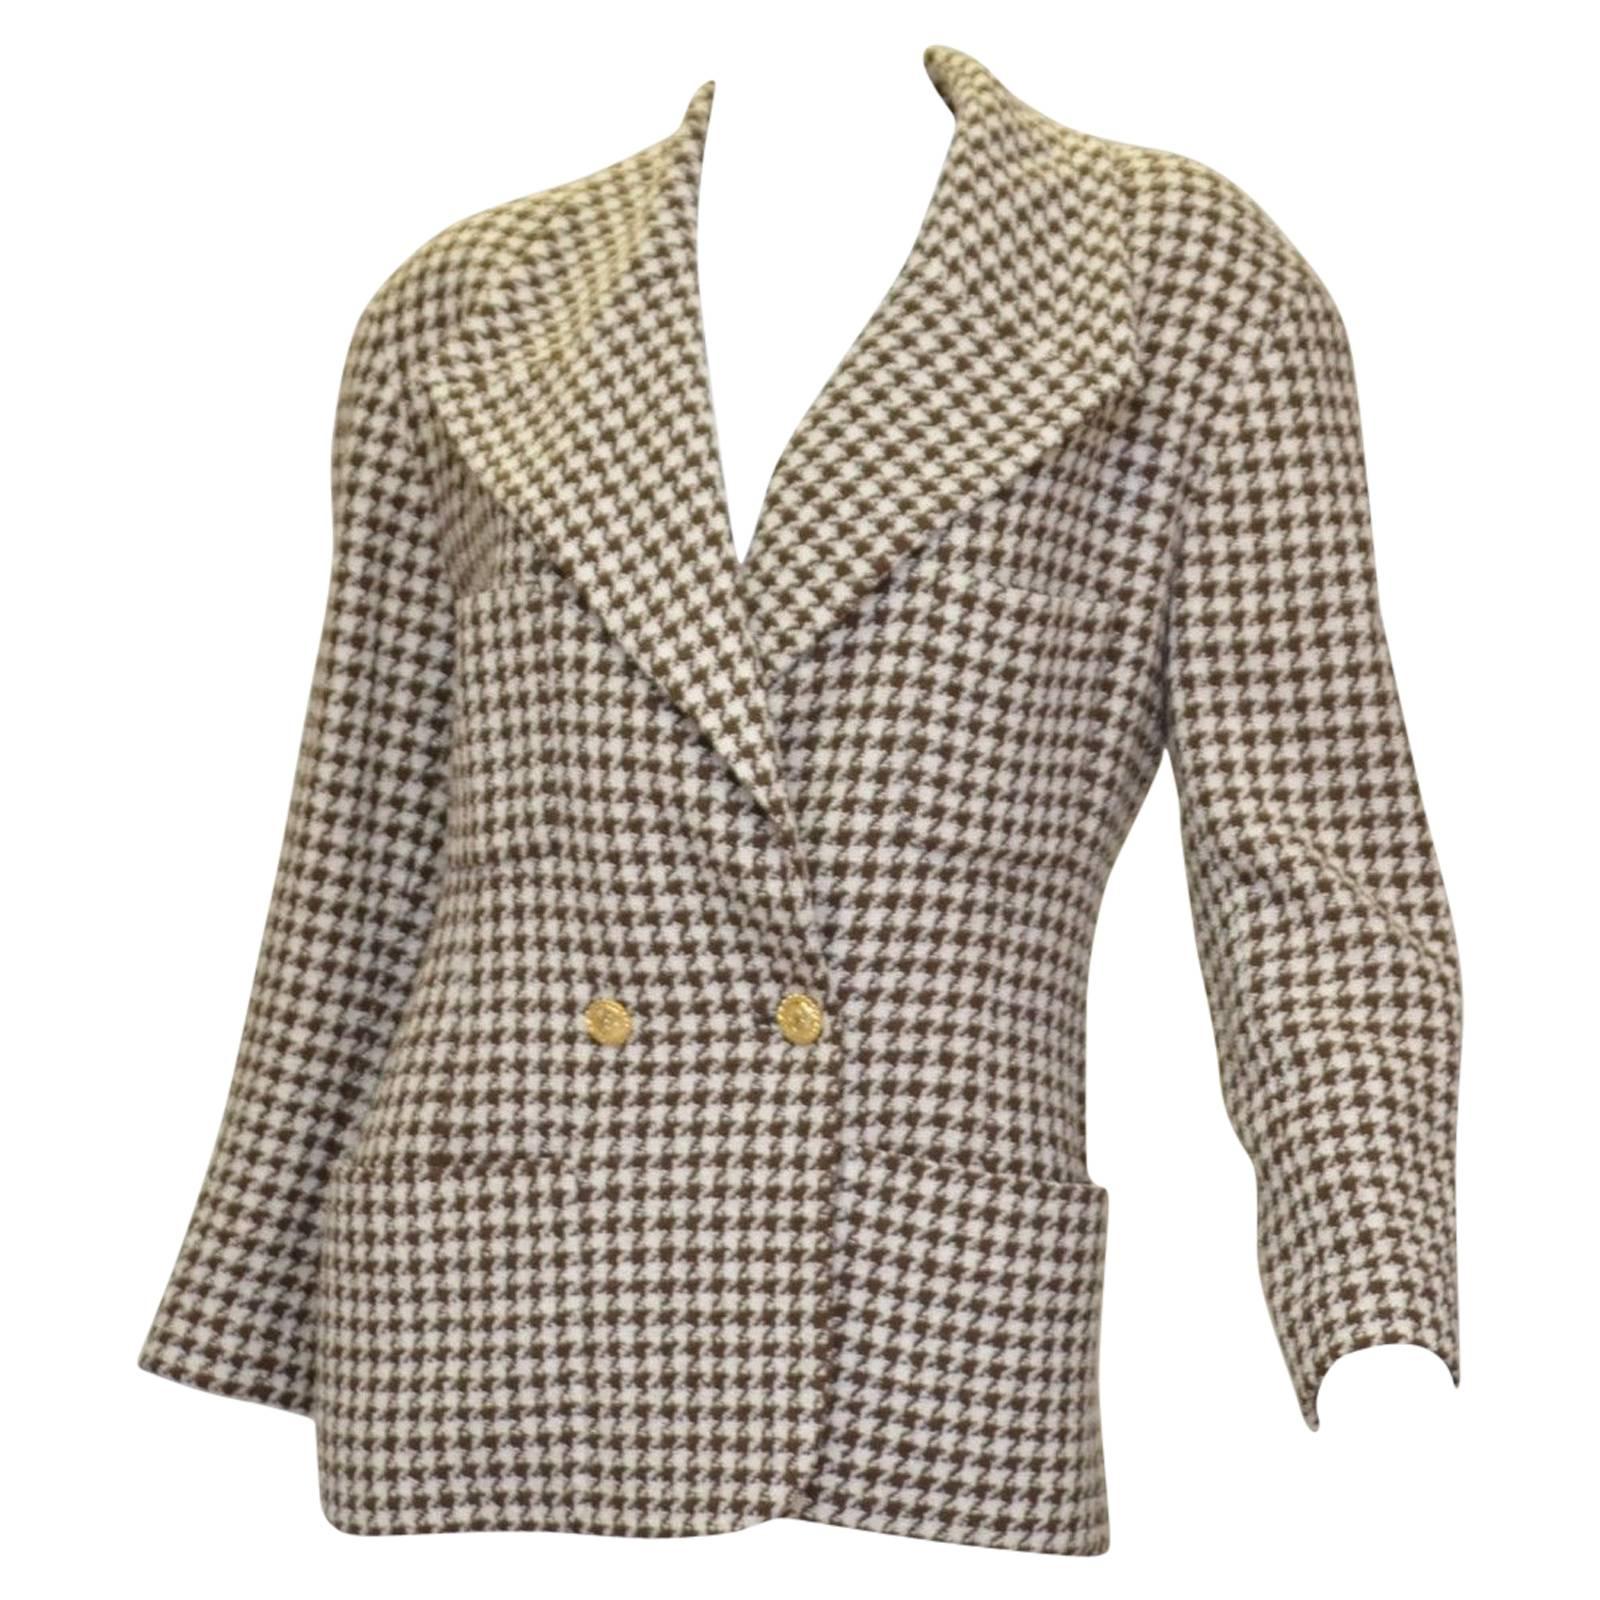 Chanel Boutique Vintage Houndstooth Jacket Gold CC Logo Buttons